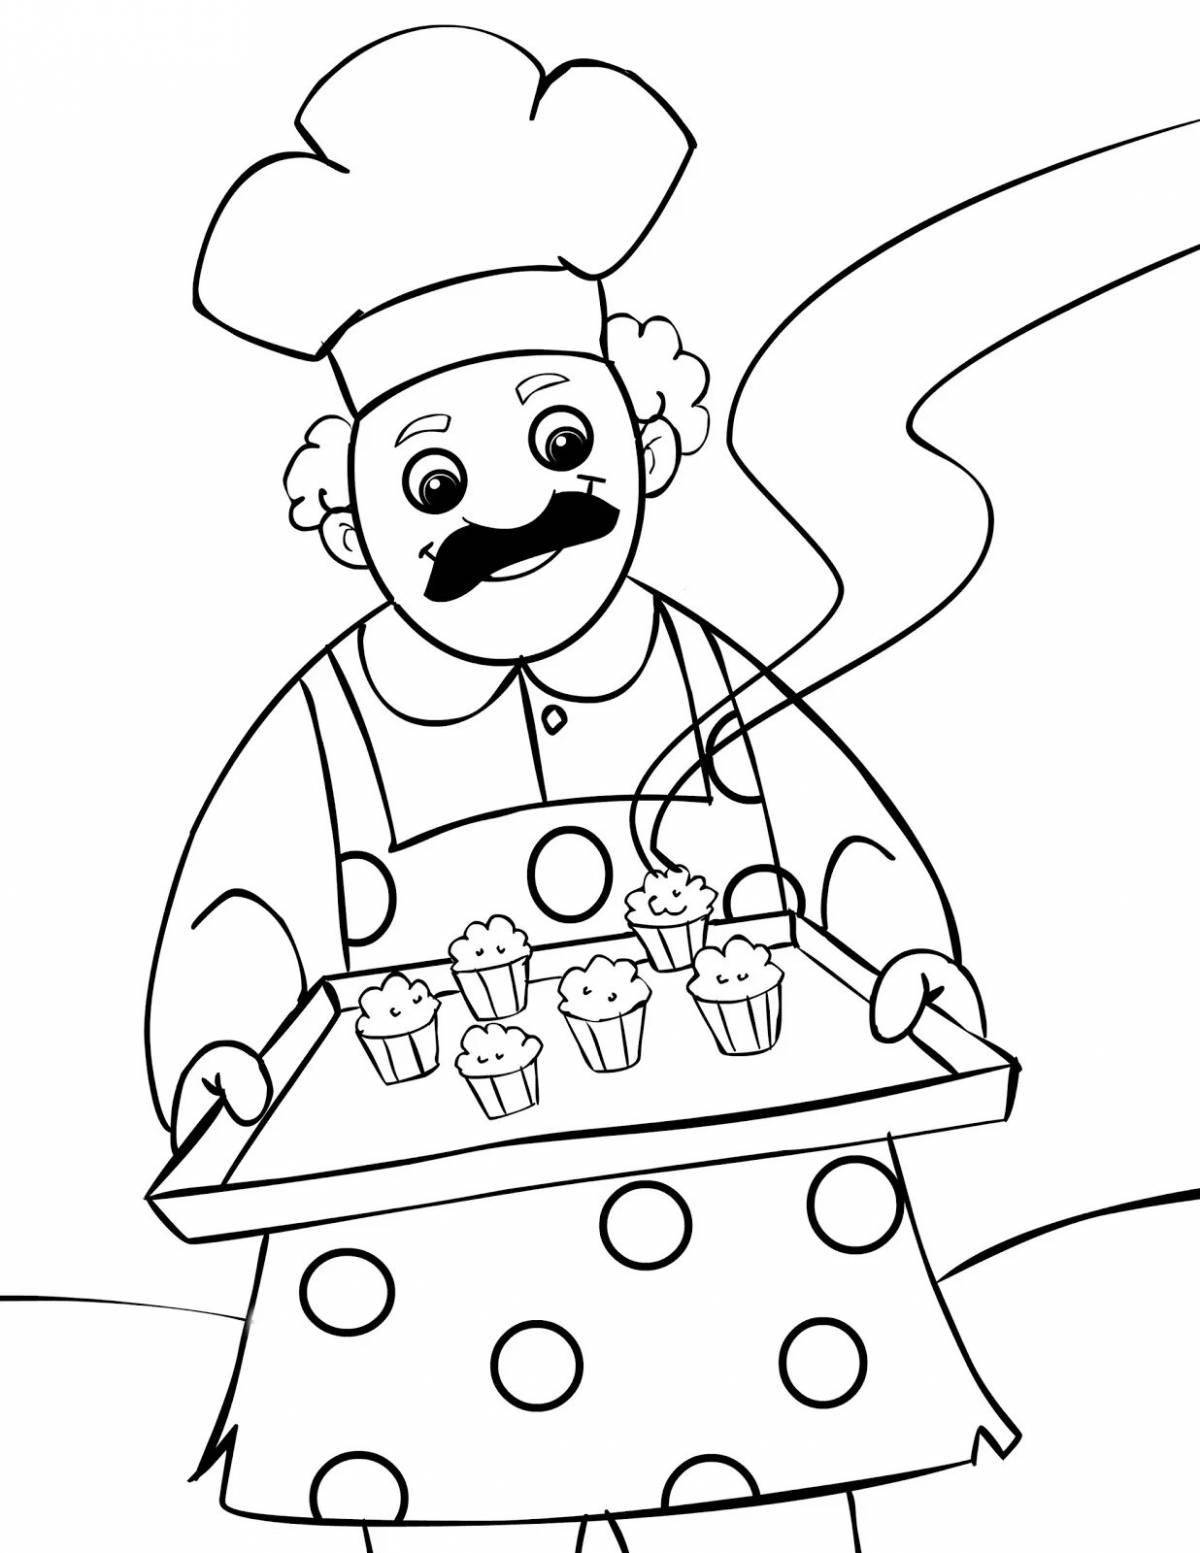 Playful chef profession coloring page